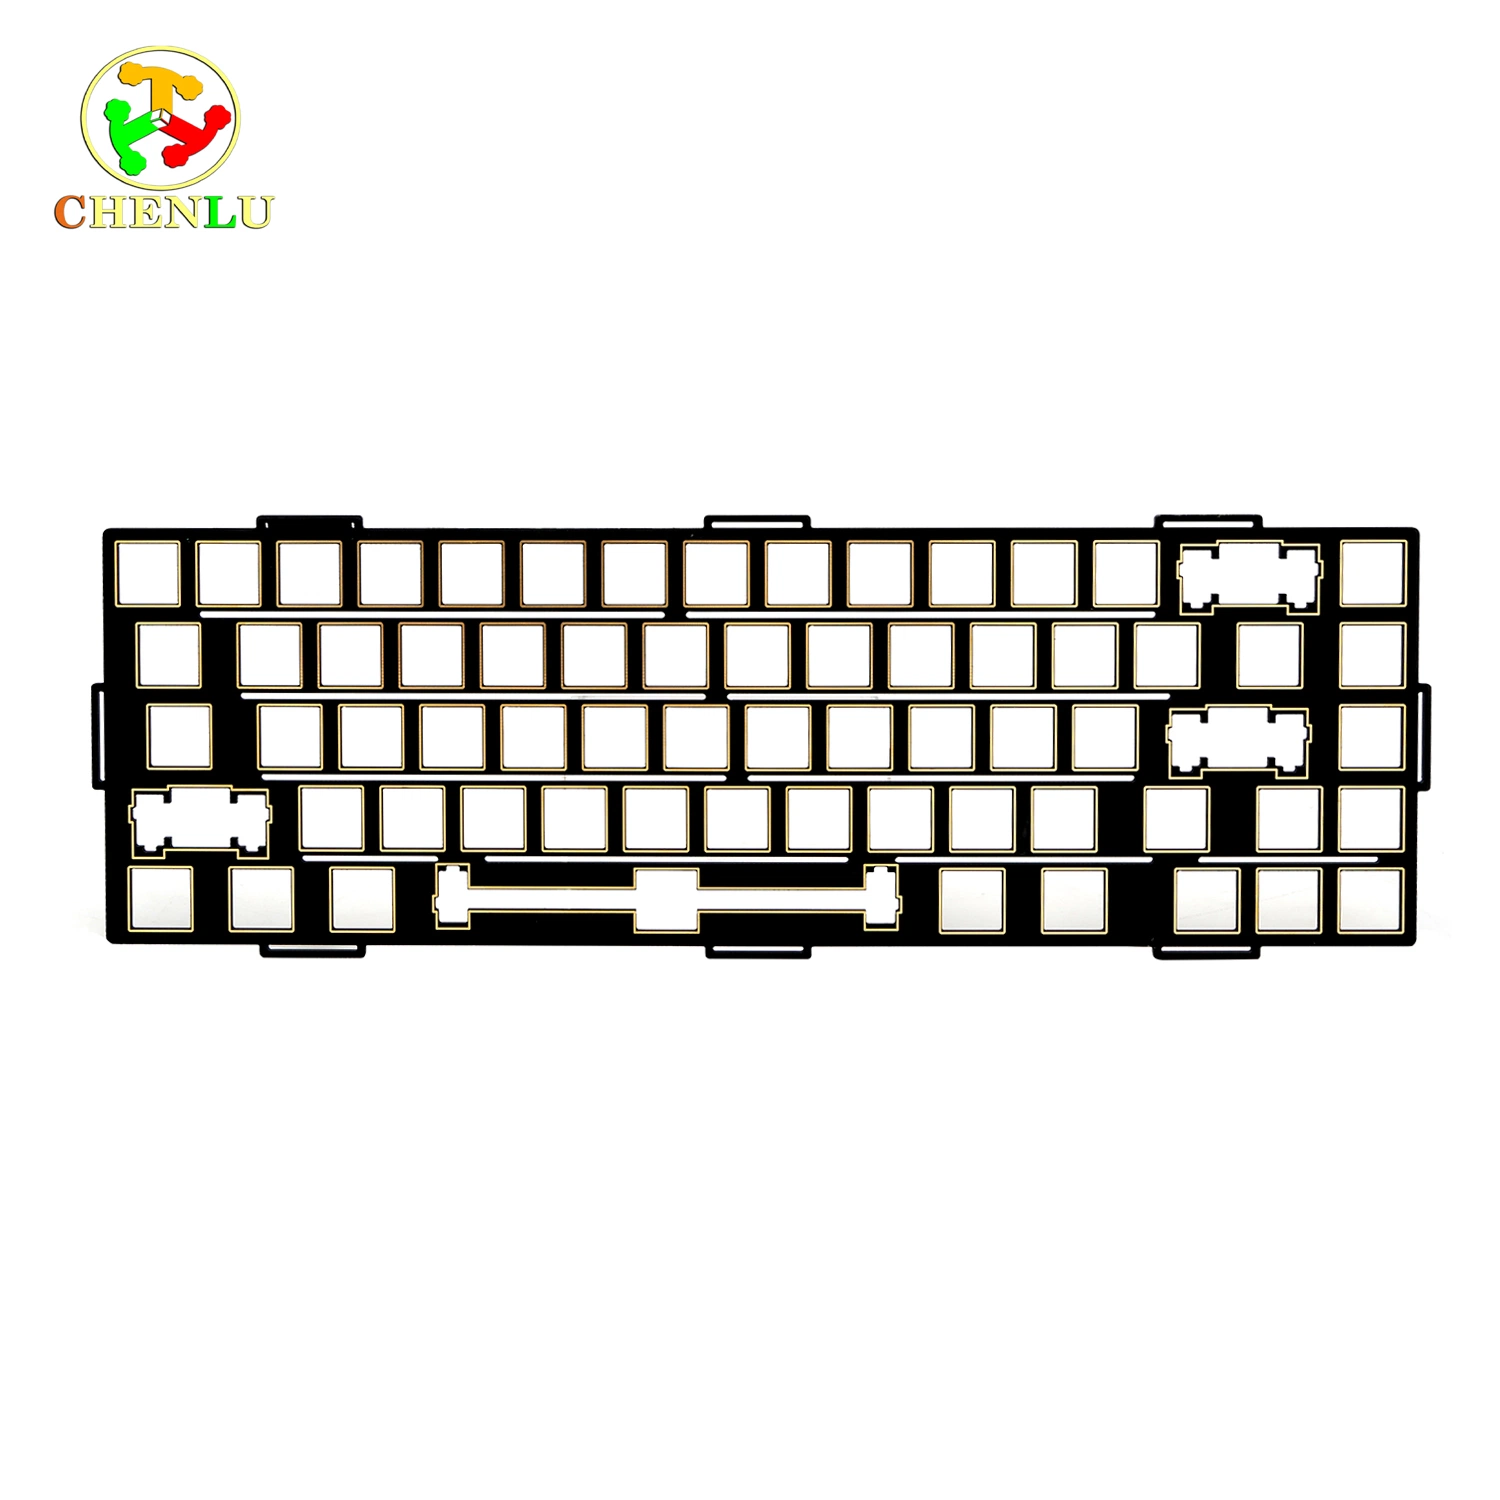 PCB Board Manufacturer PCBA Assembly Keyboard PCB SMT Other Electronic Components Printed Circuit Board Assembly Services